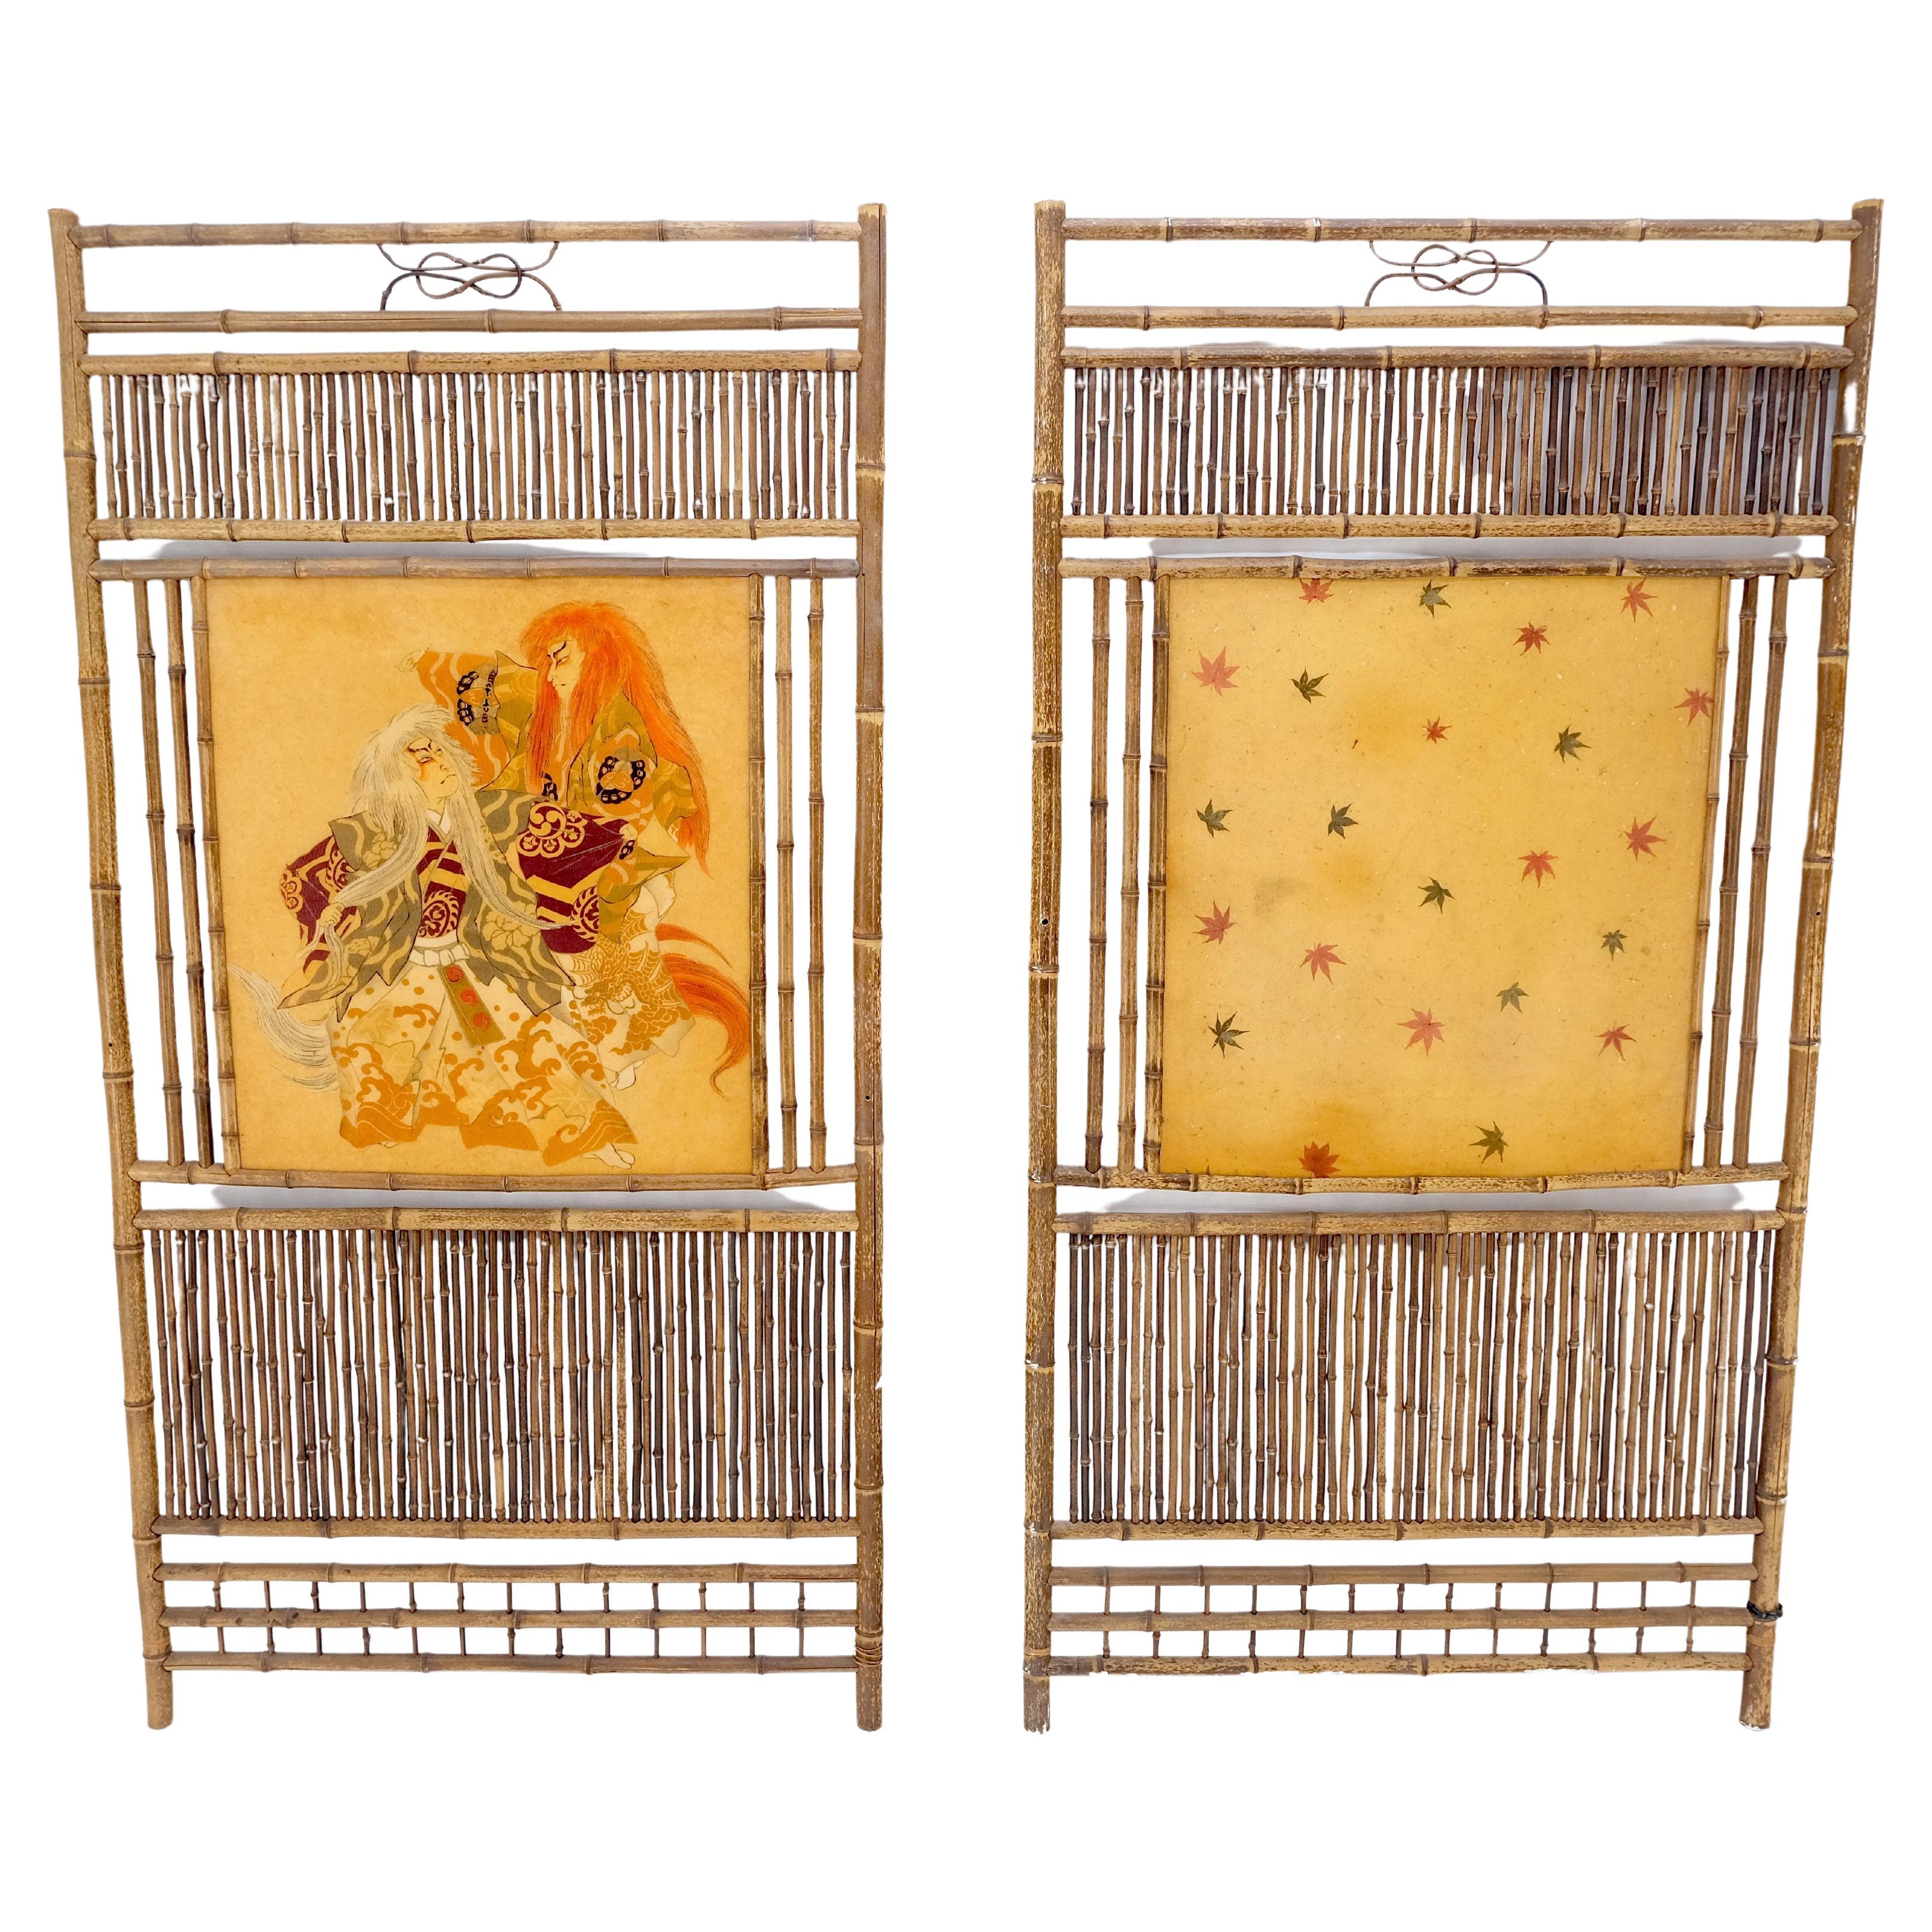 Pair of Japanese Modern Bamboo Room Dividers Screens Decorative Panels Wall Art For Sale